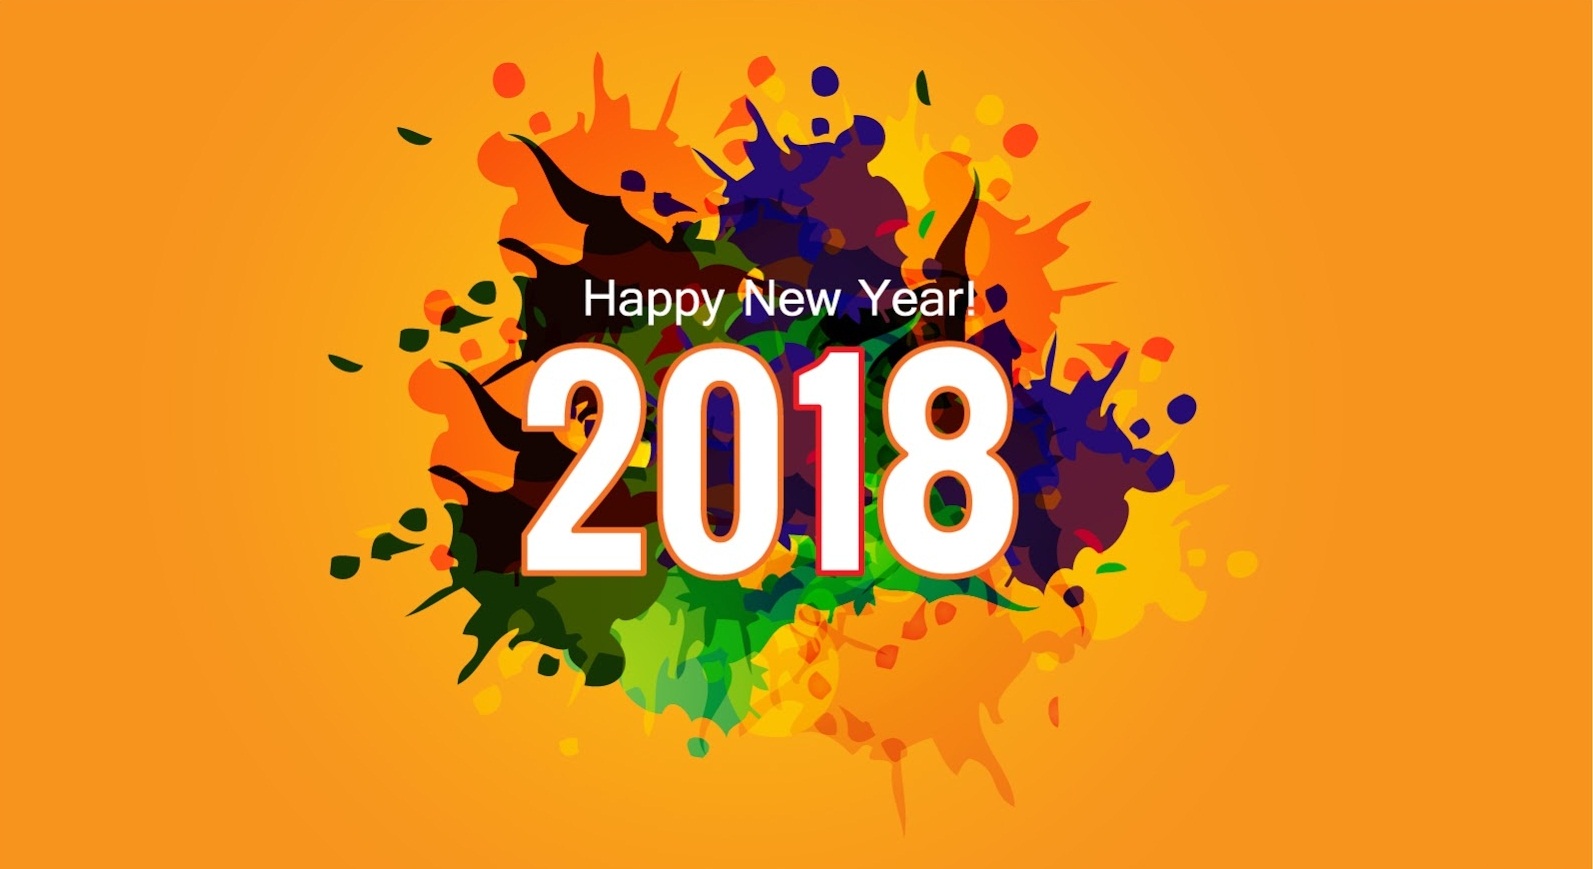 New Year 2018, Happy New Year, Year 2017, Bid adieu to year 2017, Do's and don'ts in year 2018, Religious news, Spiritual news, Weird news, Offbeat news